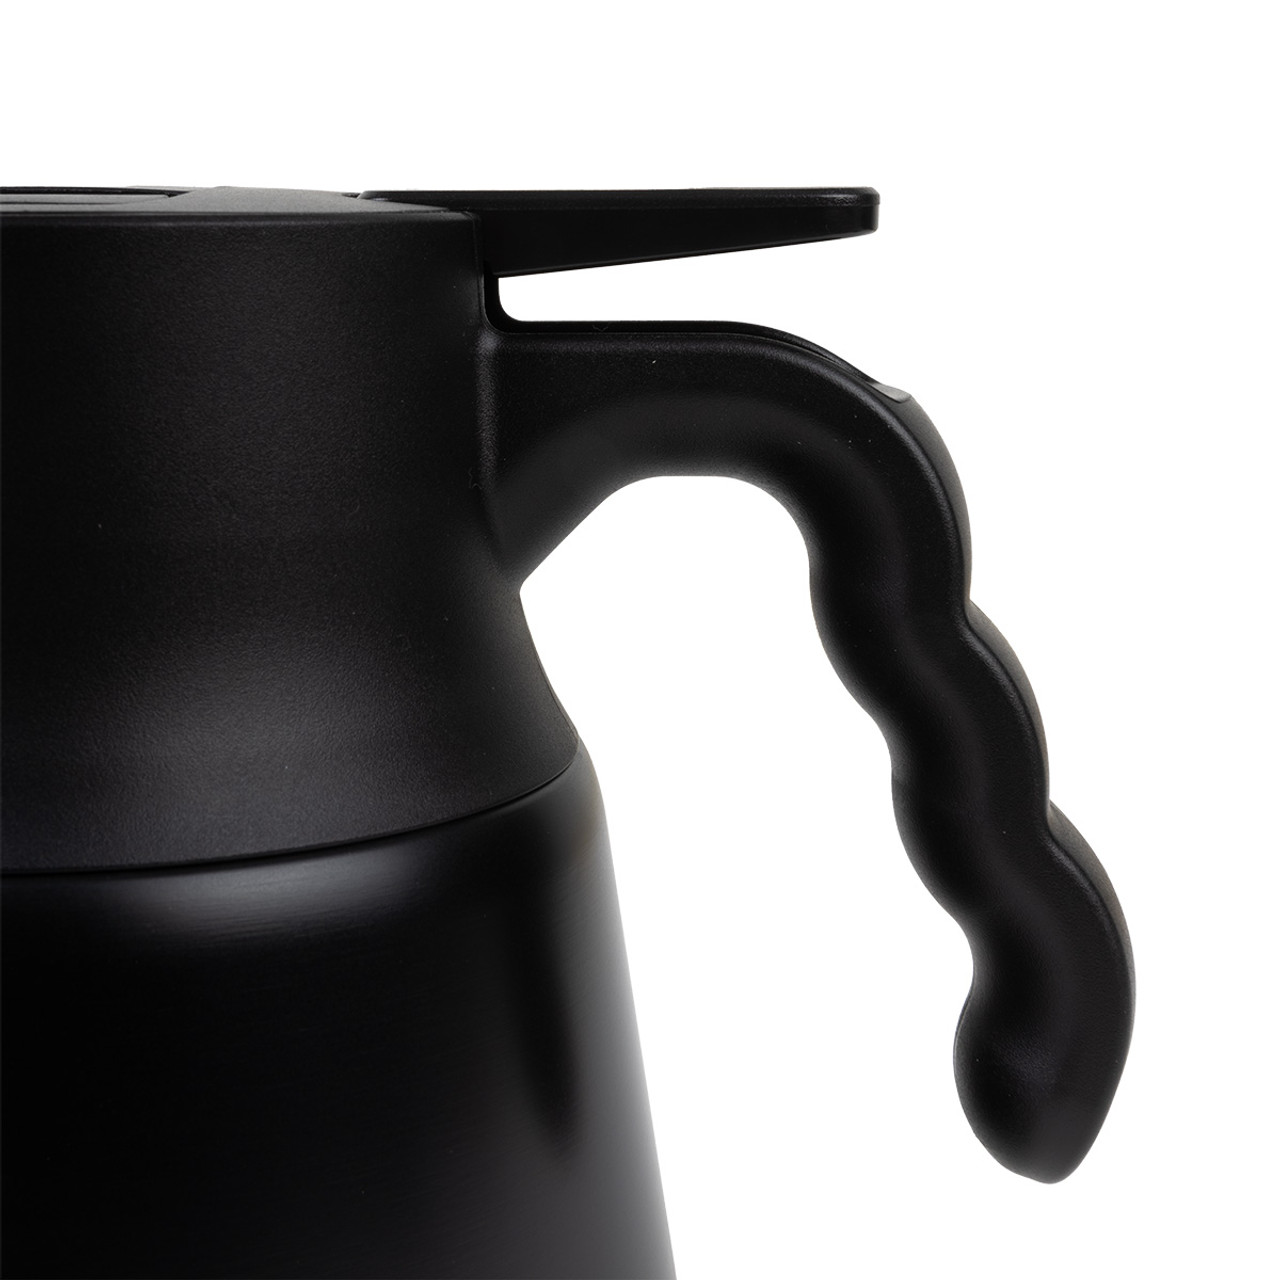 https://cdn11.bigcommerce.com/s-6h7ychjk4/images/stencil/1280x1280/products/8470/95174/Hario-02-v60-Thermal-Carafe-WBG-2__51468.1701277836.jpg?c=1&imbypass=on